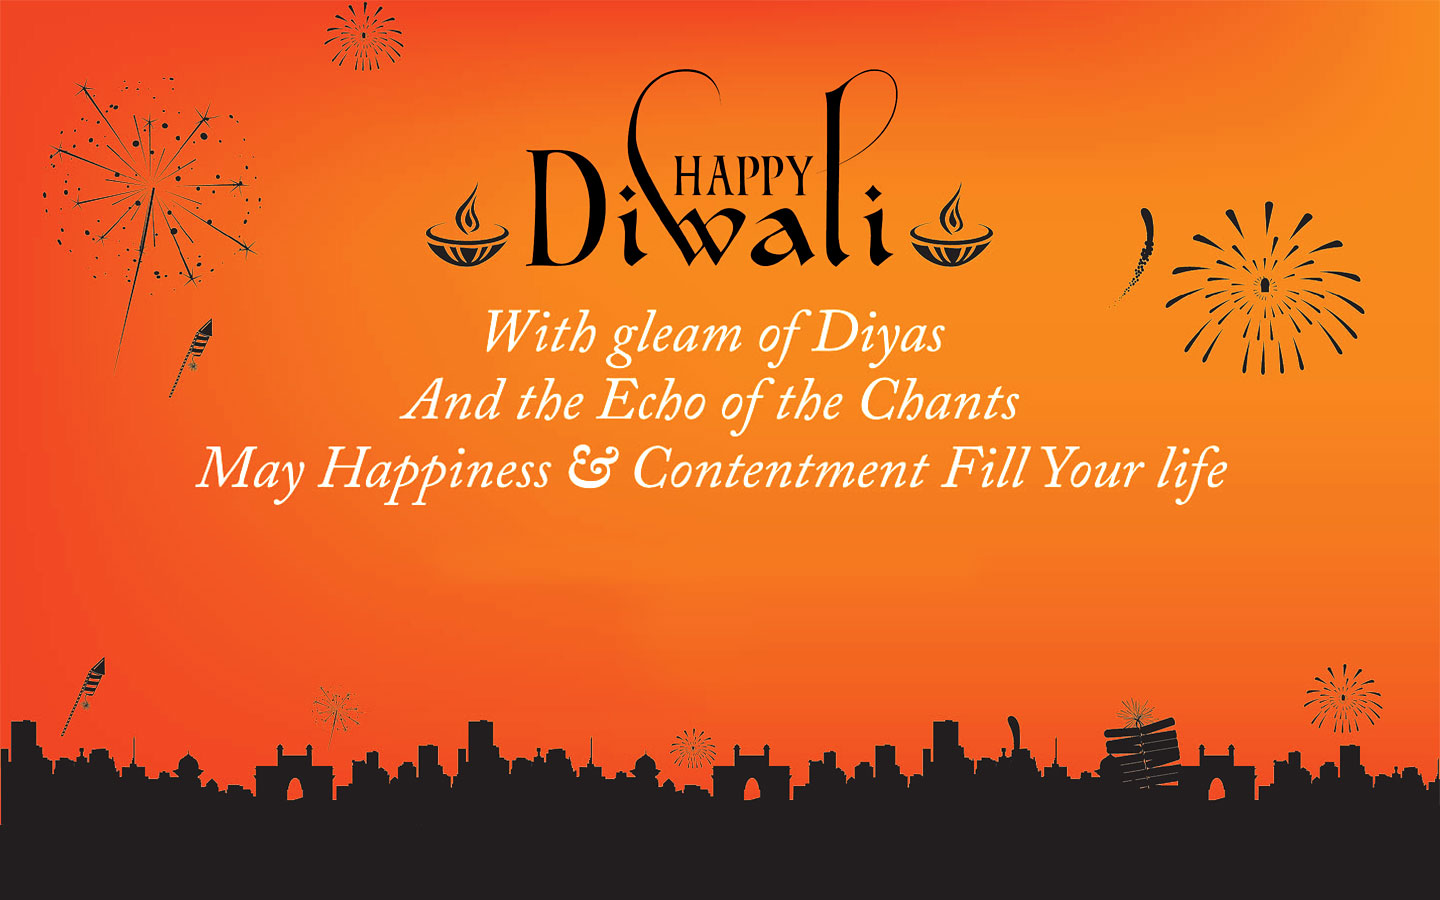 61 Diwali Wallpapers, Images and Pictures for Free Download in HD1440 x 900